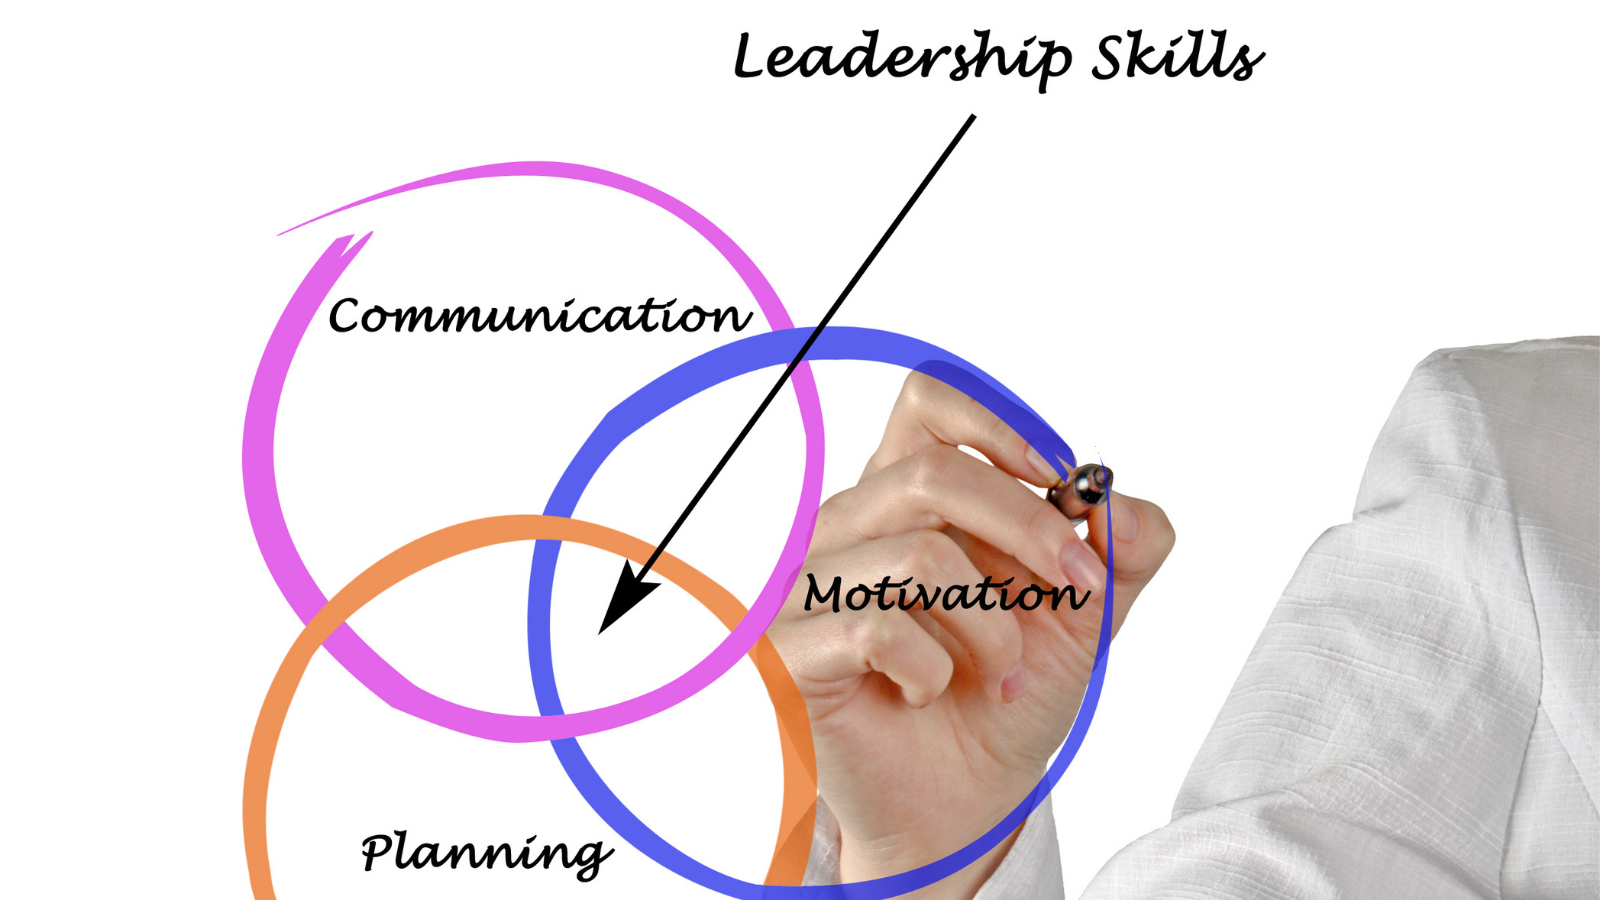 Leadership skills: requirements for an effective mentor